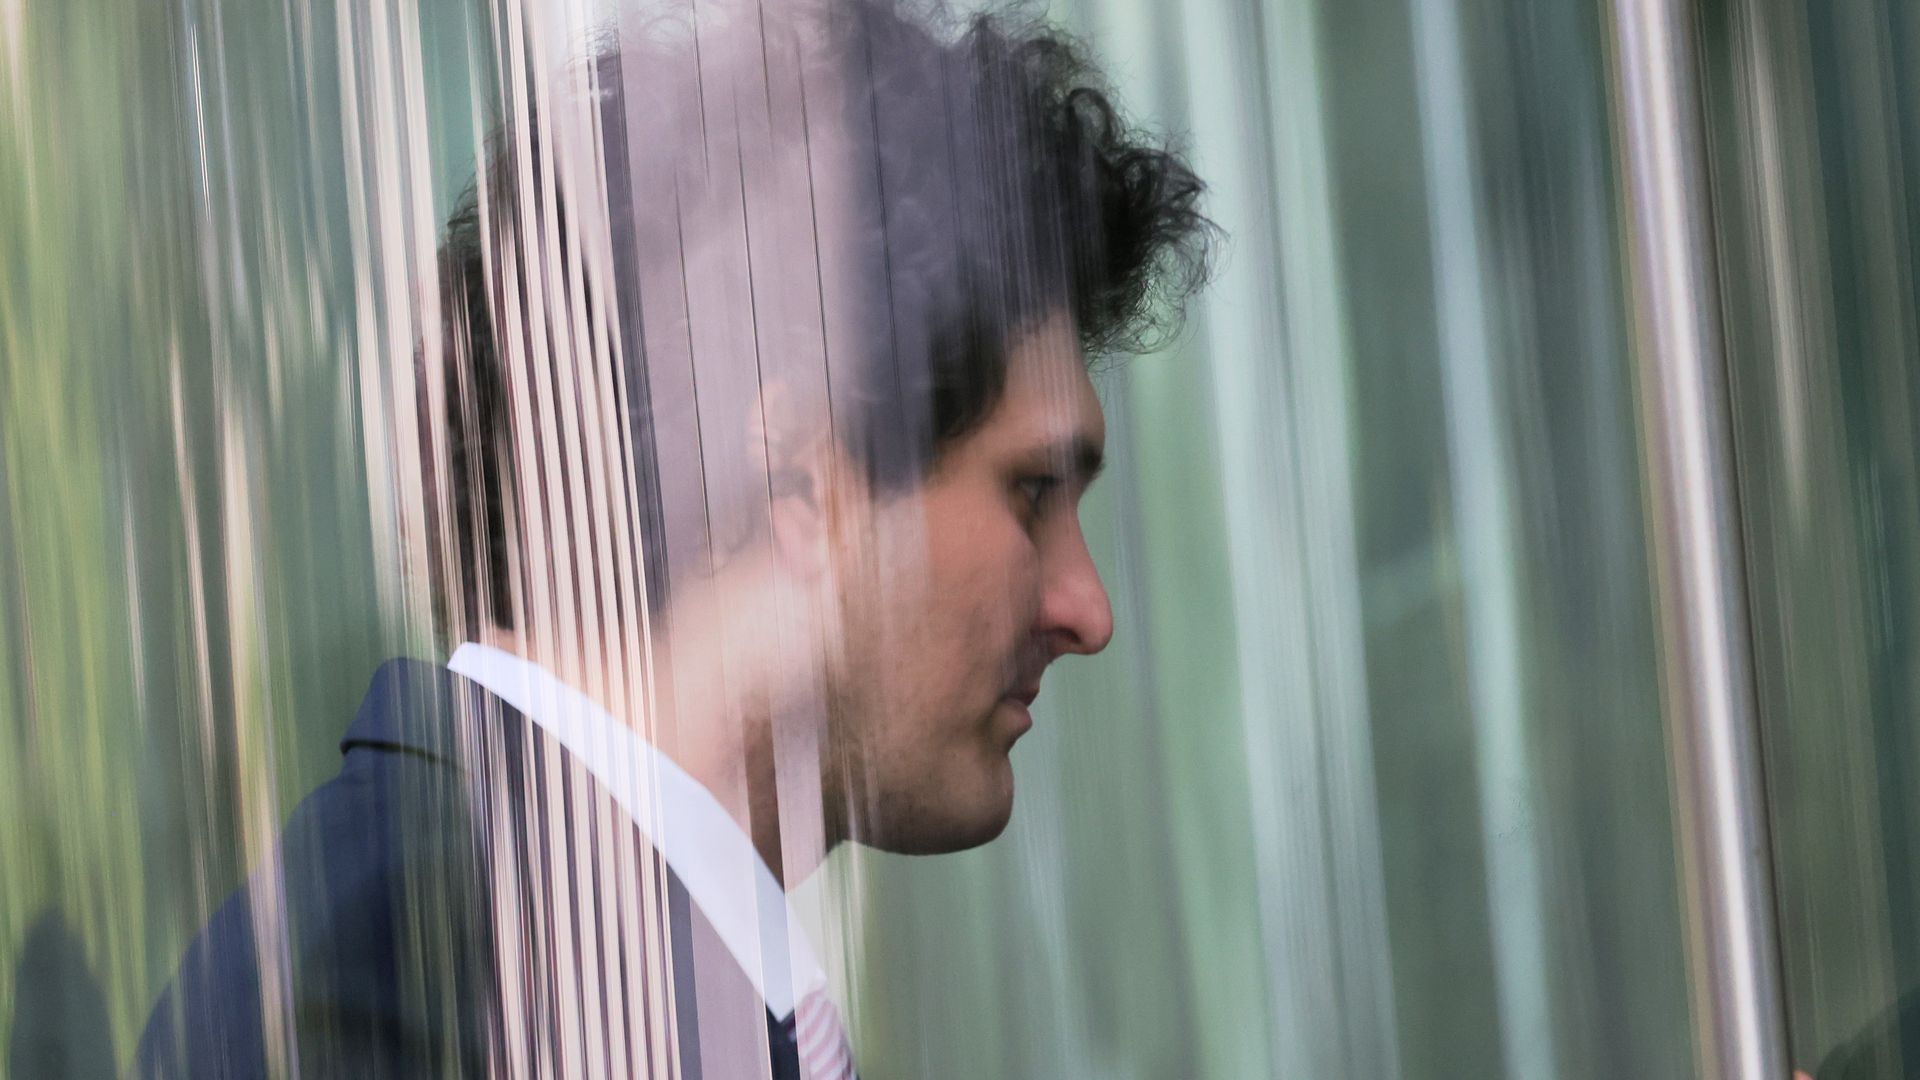 A young man entering a building, passing through glass doors. 